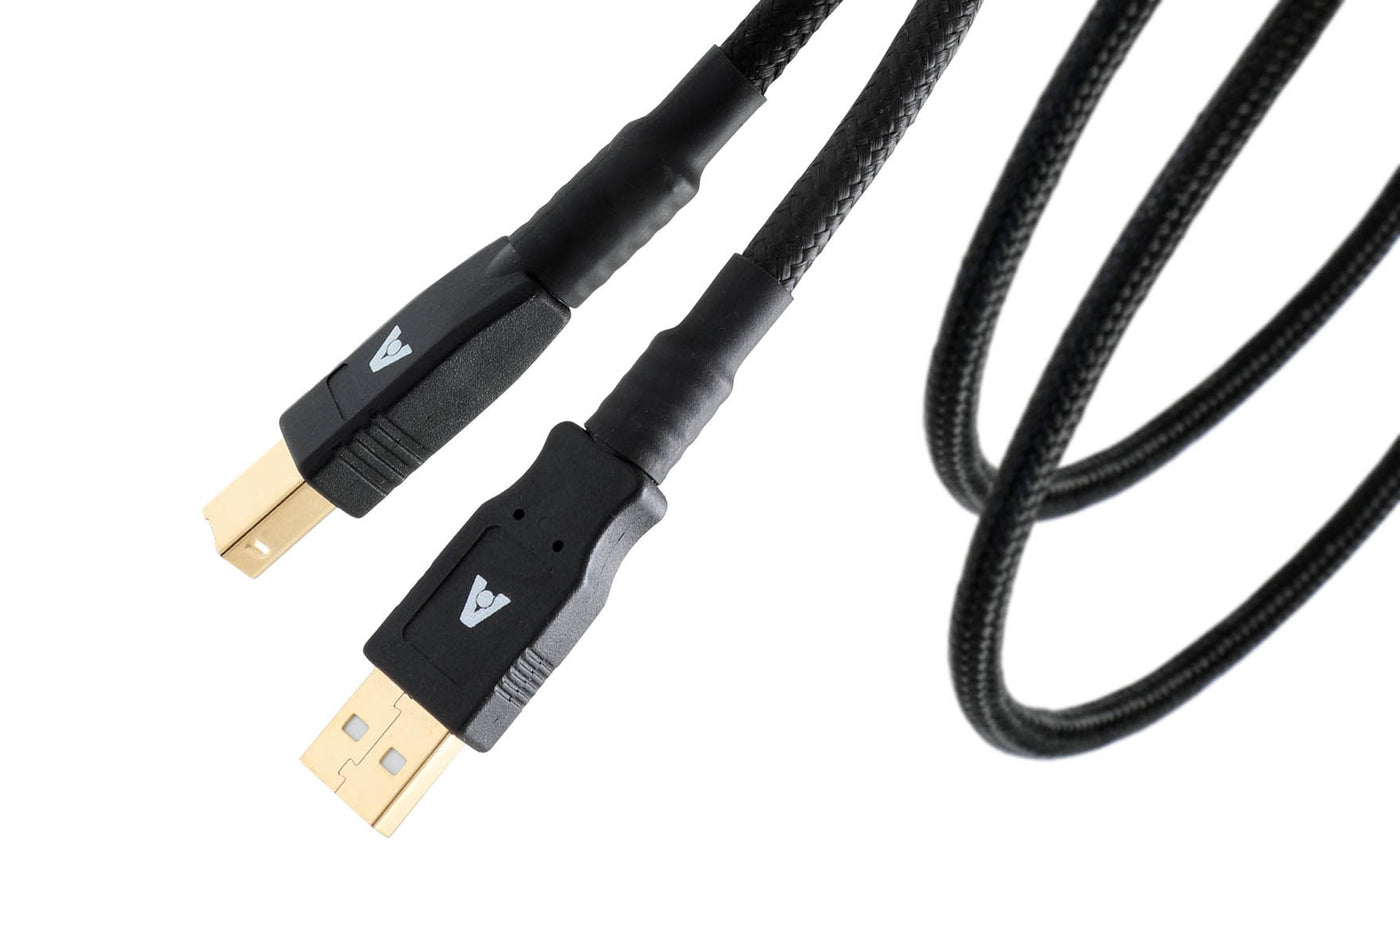 Atlas Hyper sc USB (Type A to B connector) Cable